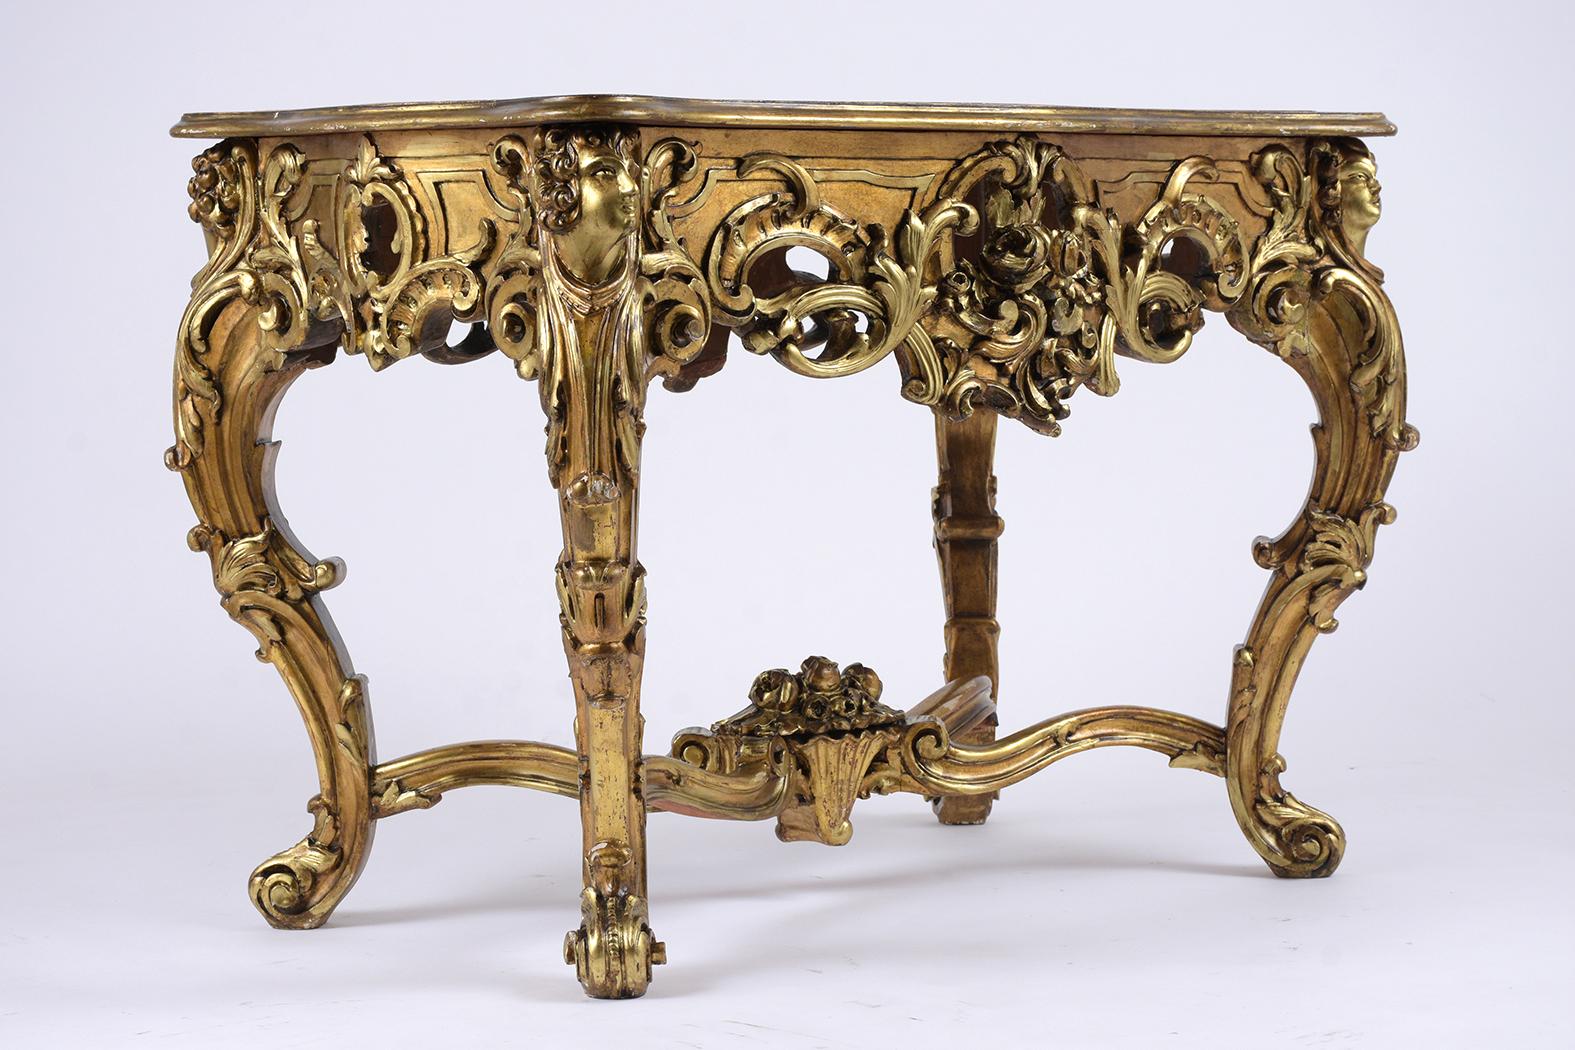 This French antique Louis XV giltwood carved center table features an original insert marble top a finely carved through ou the entire piece cabriole legs detail and has an X-shaped stretcher with a large basket flower in the center.